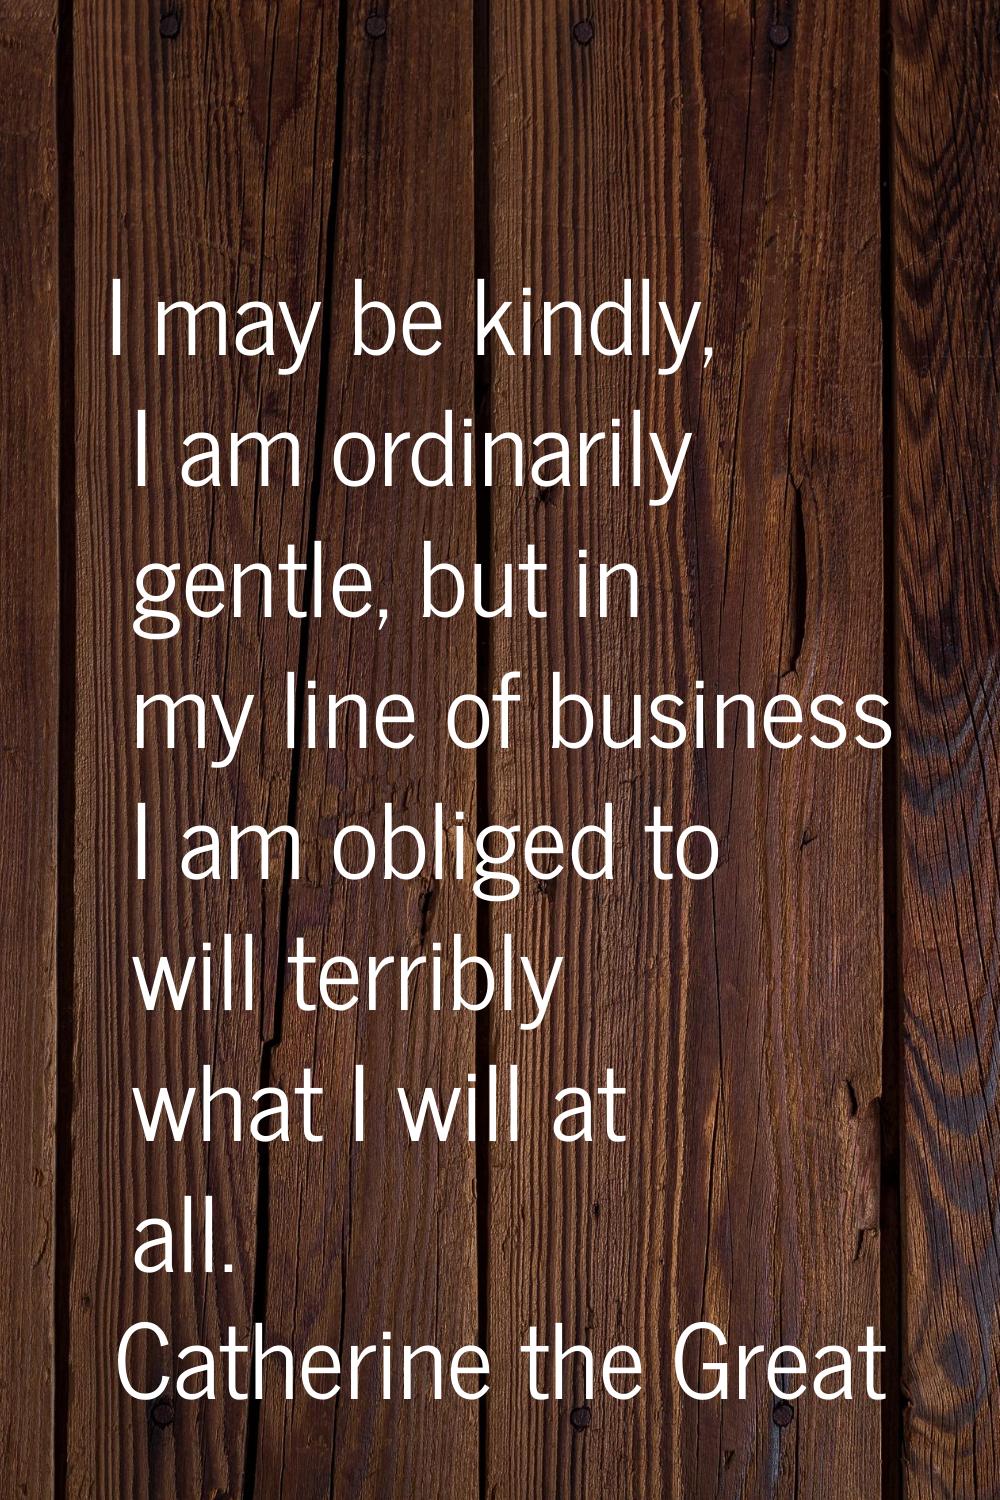 I may be kindly, I am ordinarily gentle, but in my line of business I am obliged to will terribly w